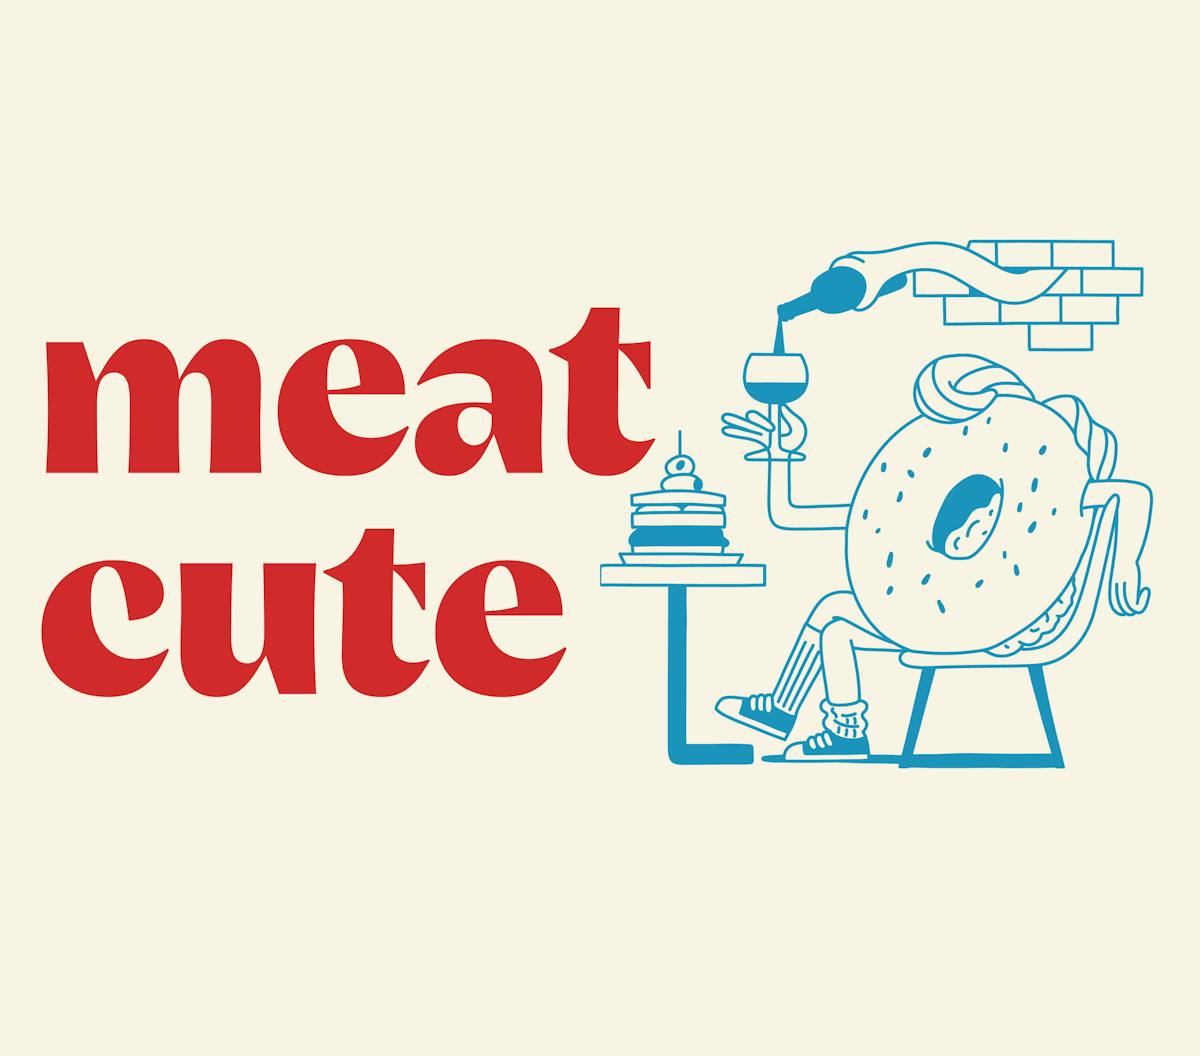 meat cute graphic with bagel guy holding a glass of wine